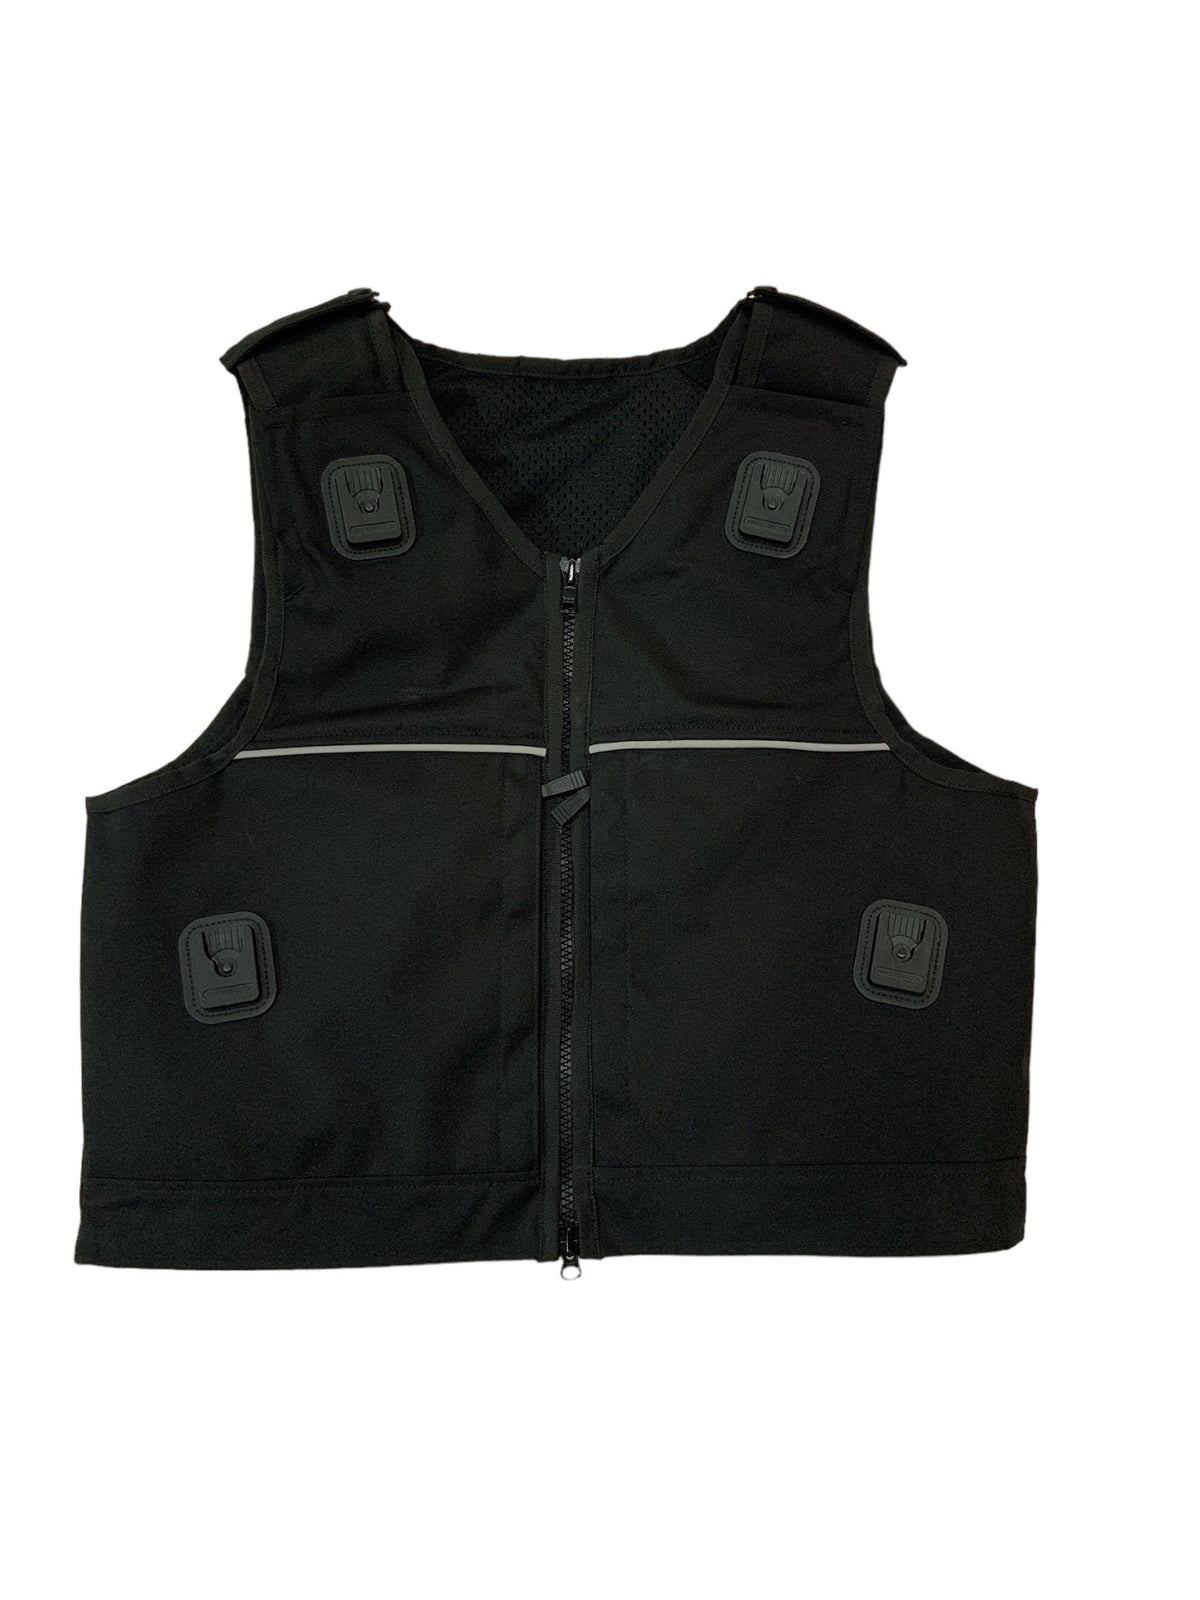 Aegis/Hawk Female Body Armour Cover Tactical Vest Security **COVER ONL ...